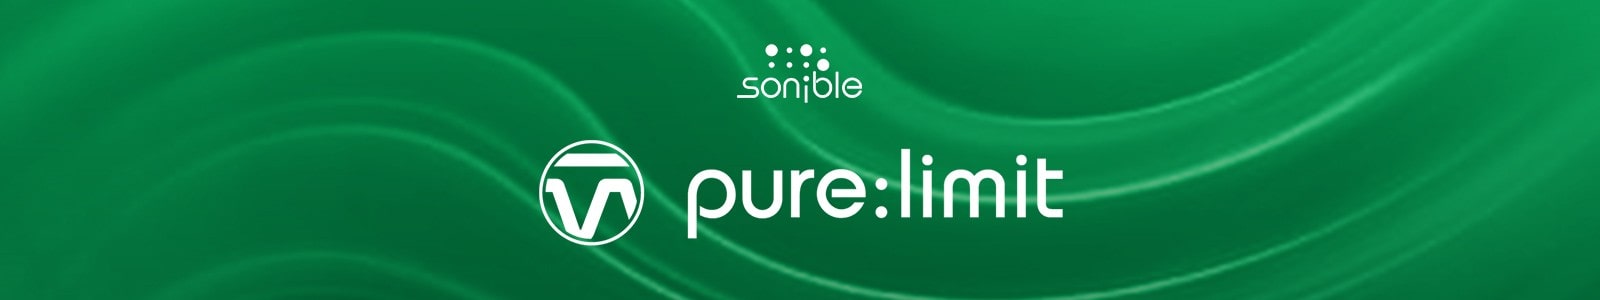 pure:limit by Sonible